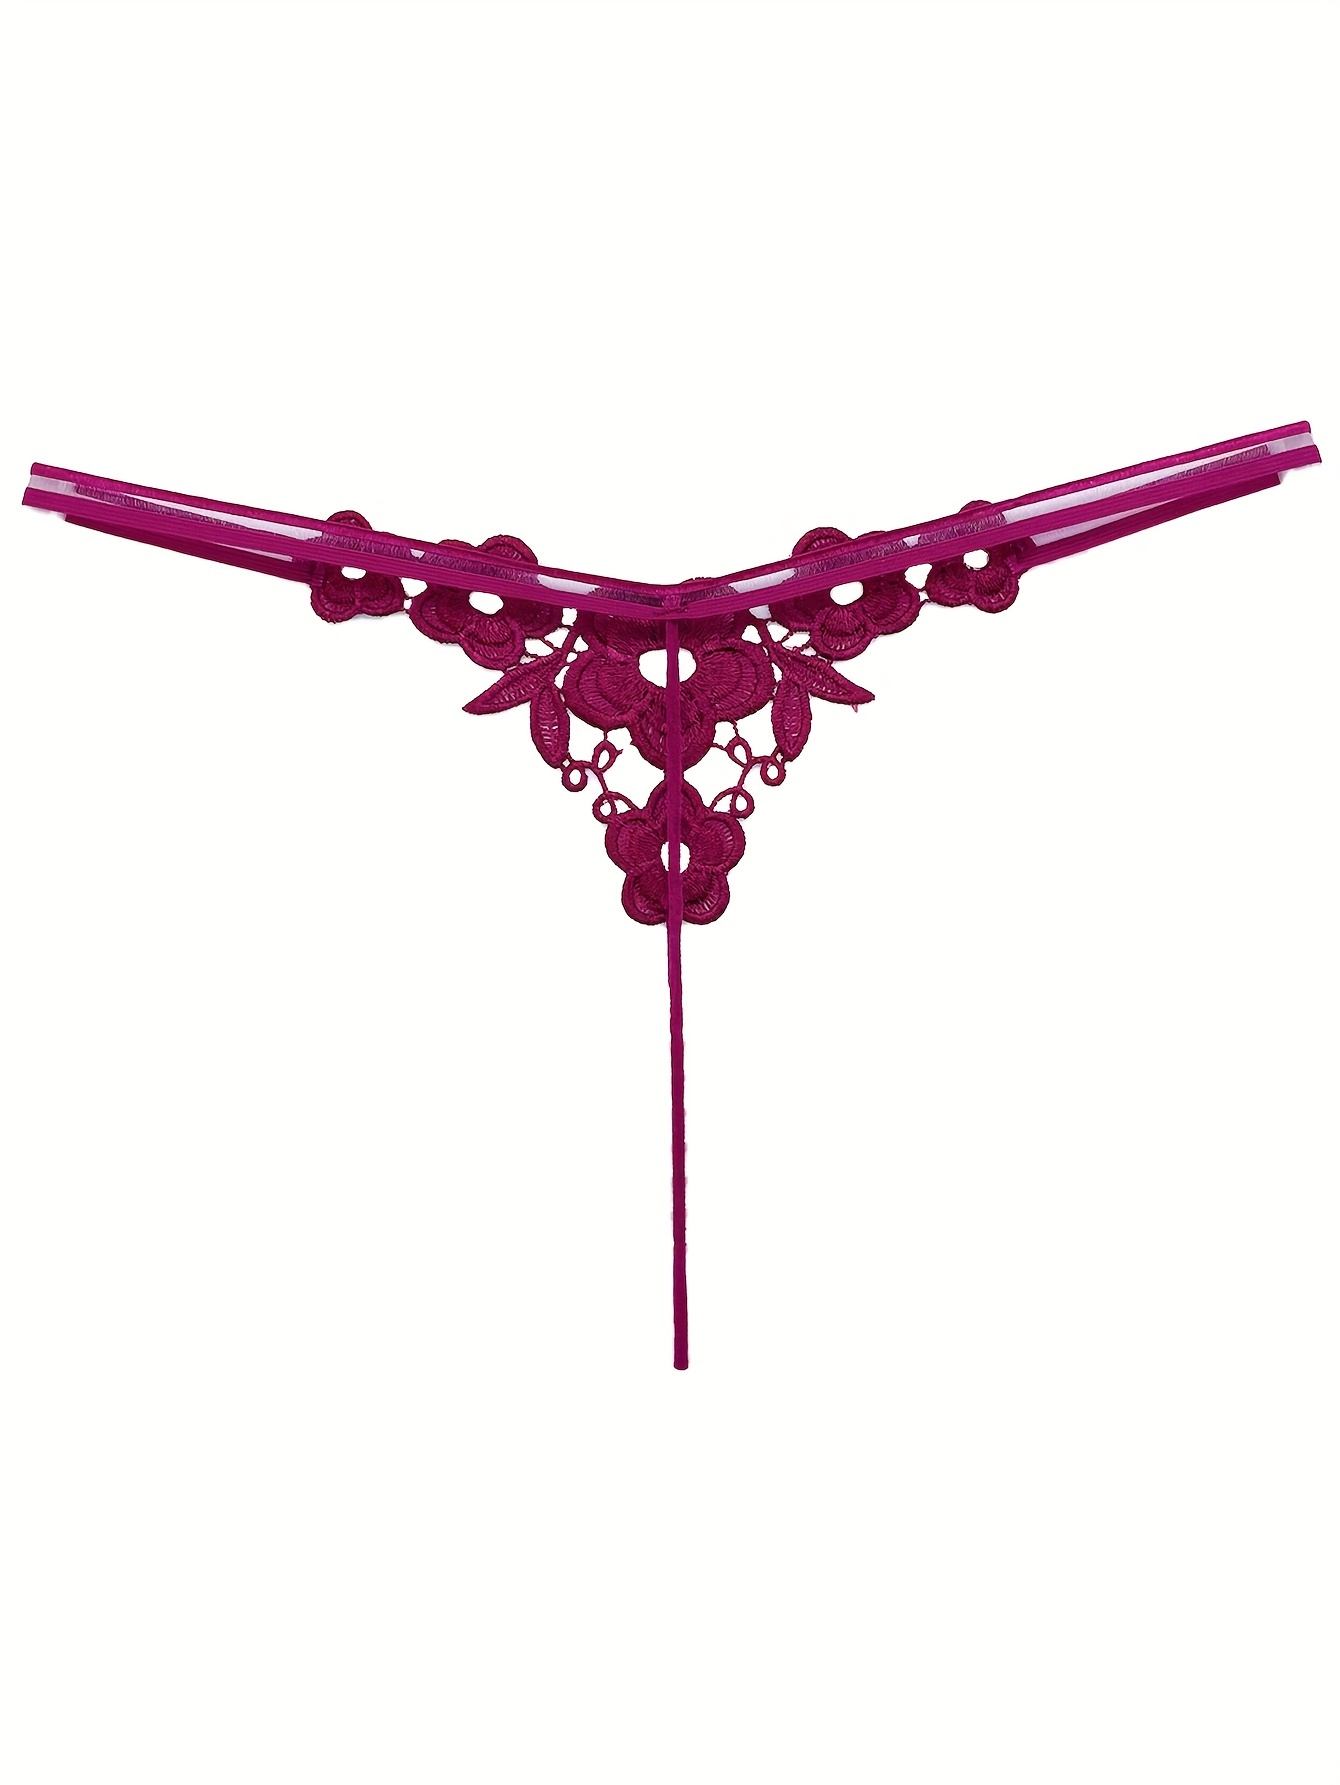 Ladies Pearl Thong, G String. Lac flower & bow design.